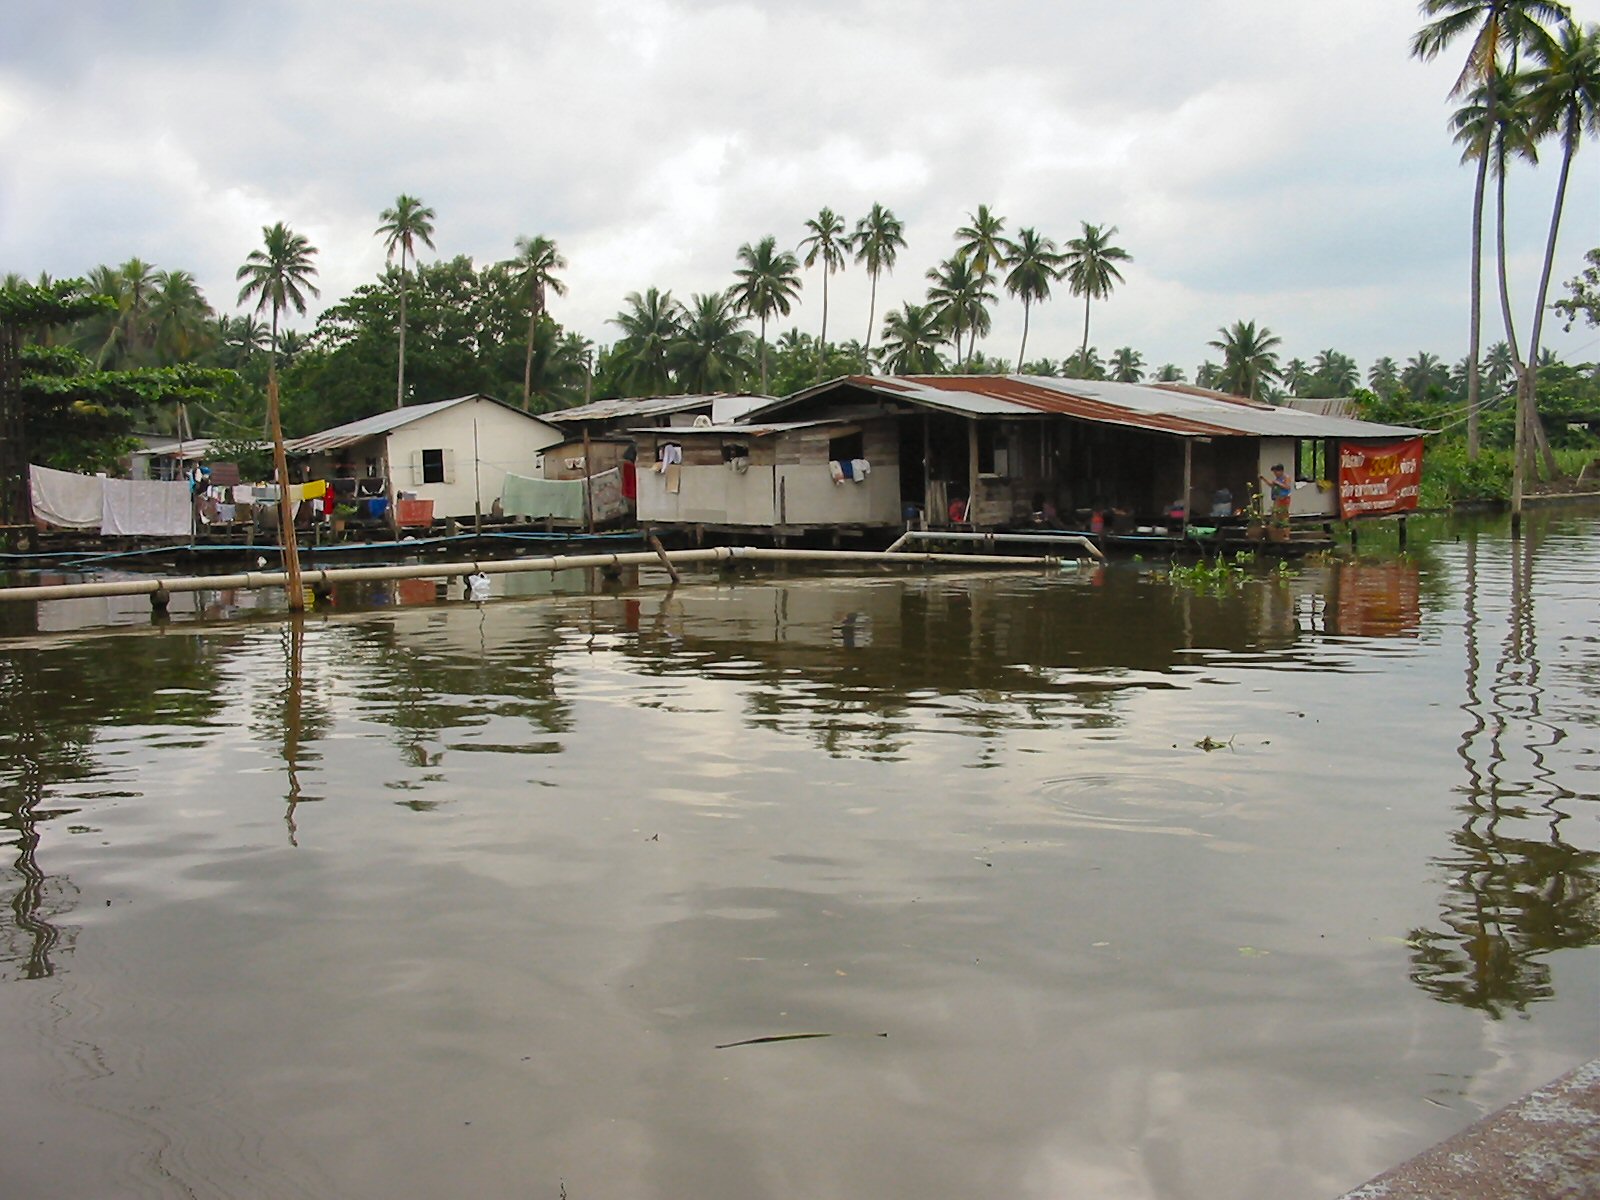 several houses on stilts in front of the water